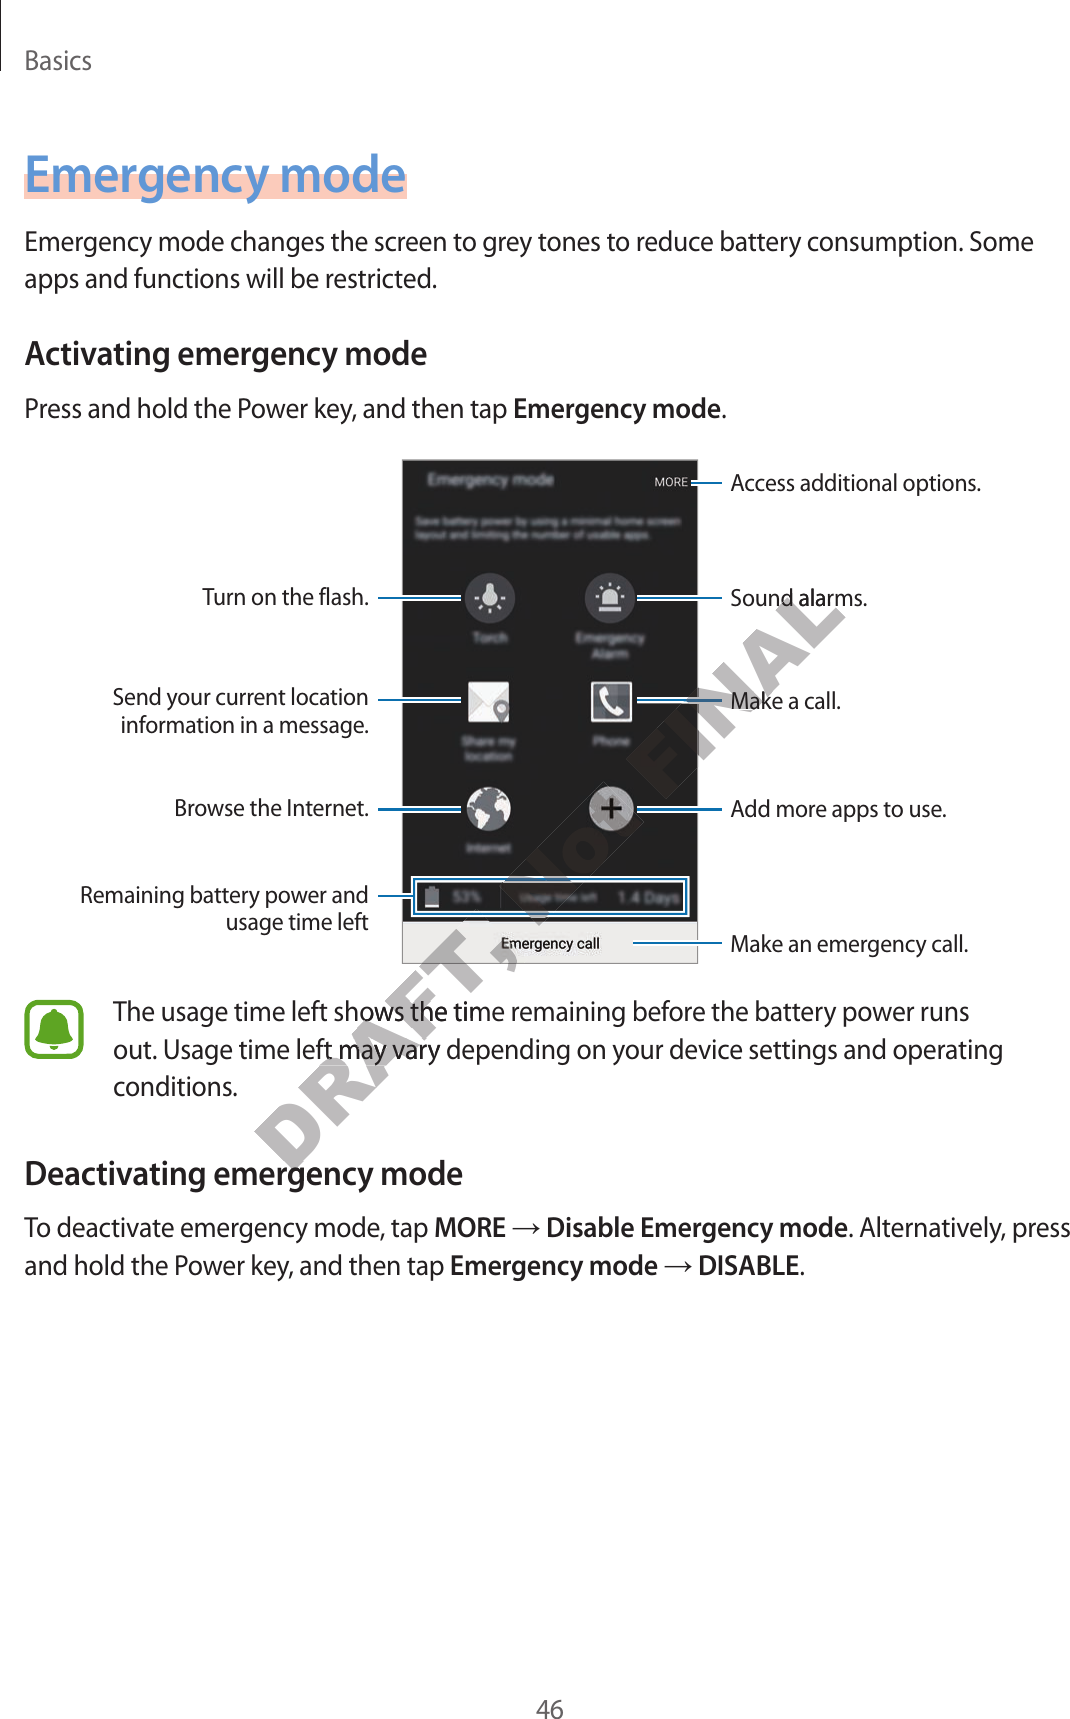 Basics46Emergency modeEmergency mode changes the screen to gr ey t ones to r educ e batt ery consumption. Some apps and functions will be restricted .Activating emer gency modePr ess and hold the Pow er key, and then tap Emergency mode.Add mor e apps to use .Make an emergency call.Remaining battery power and usage time leftTurn on the flash.Make a call.Send your current location information in a message .Brow se the Internet.Acc ess additional options .Sound alarms.The usage time left shows the time r emaining bef or e the batt ery power runs out. Usage time left may vary depending on your device settings and operating conditions.Deactiva ting emer gency modeTo deactivate emergency mode, tap MORE → Disable Emergency mode. Alternativ ely, pr ess and hold the P o w er key, and then tap Emergency mode → DISABLE.DRAFT, DRAFT, DRAFT, DRAFT, DRAFT, DRAFT, DRAFT, The usage time left shows the time r emaining bef or e the batt ery power runs DRAFT, The usage time left shows the time r emaining bef or e the batt ery power runs out. Usage time left may vary depending on your device settings and operating DRAFT, out. Usage time left may vary depending on your device settings and operating Deactiva ting emer gency modeDRAFT, Deactiva ting emer gency modeNot Not Not FINALFINALFINALFINALFINALMake a call.FINALMake a call.Sound alarms.FINALSound alarms.